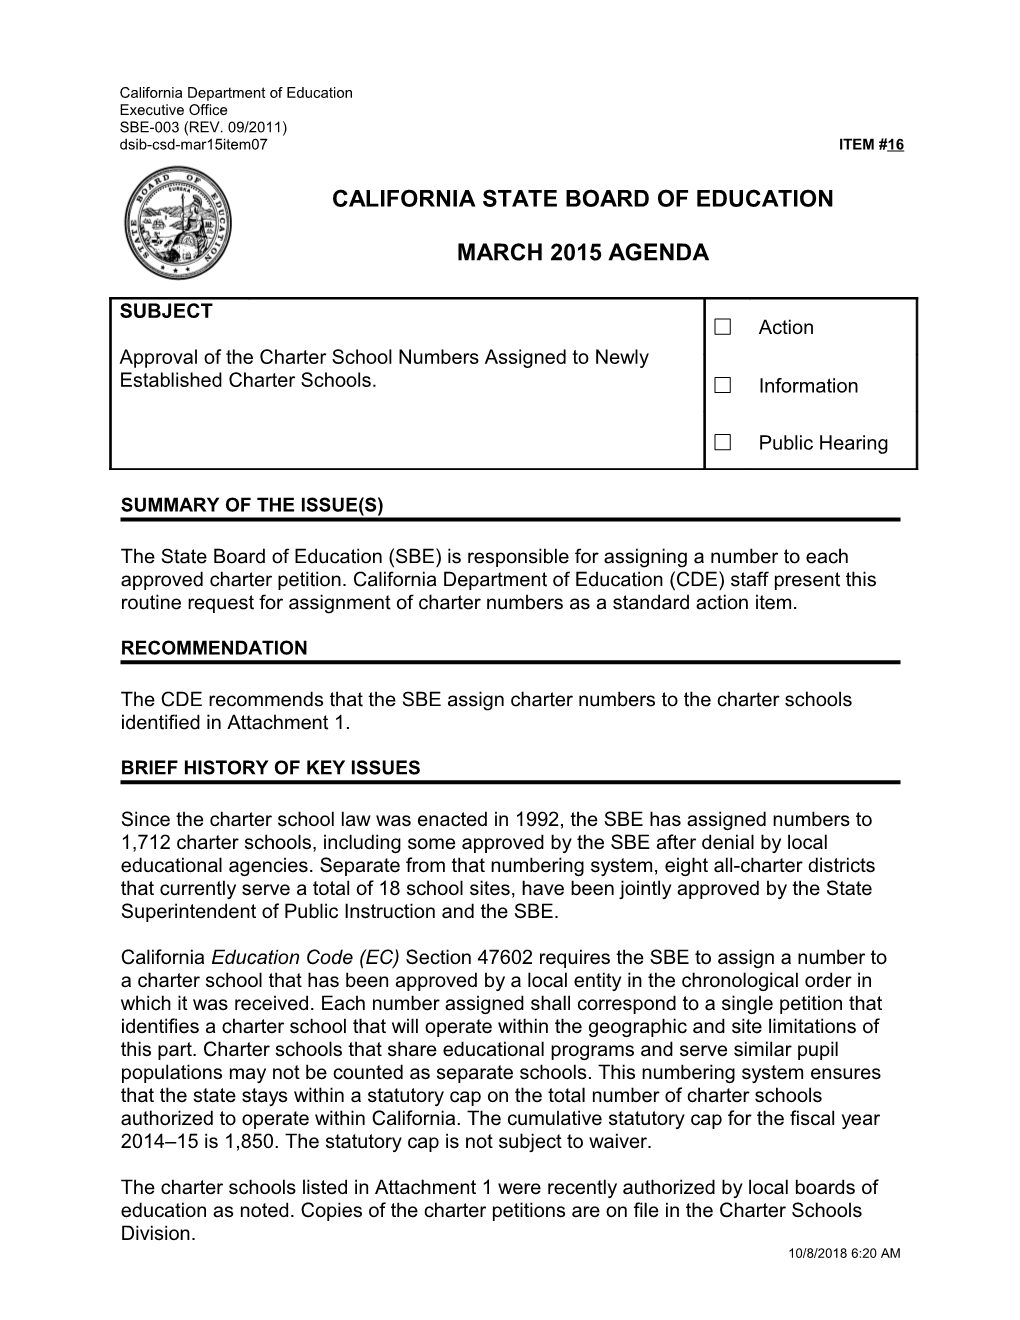 March 2015 Agenda Item 16 - Meeting Agendas (CA State Board of Education)